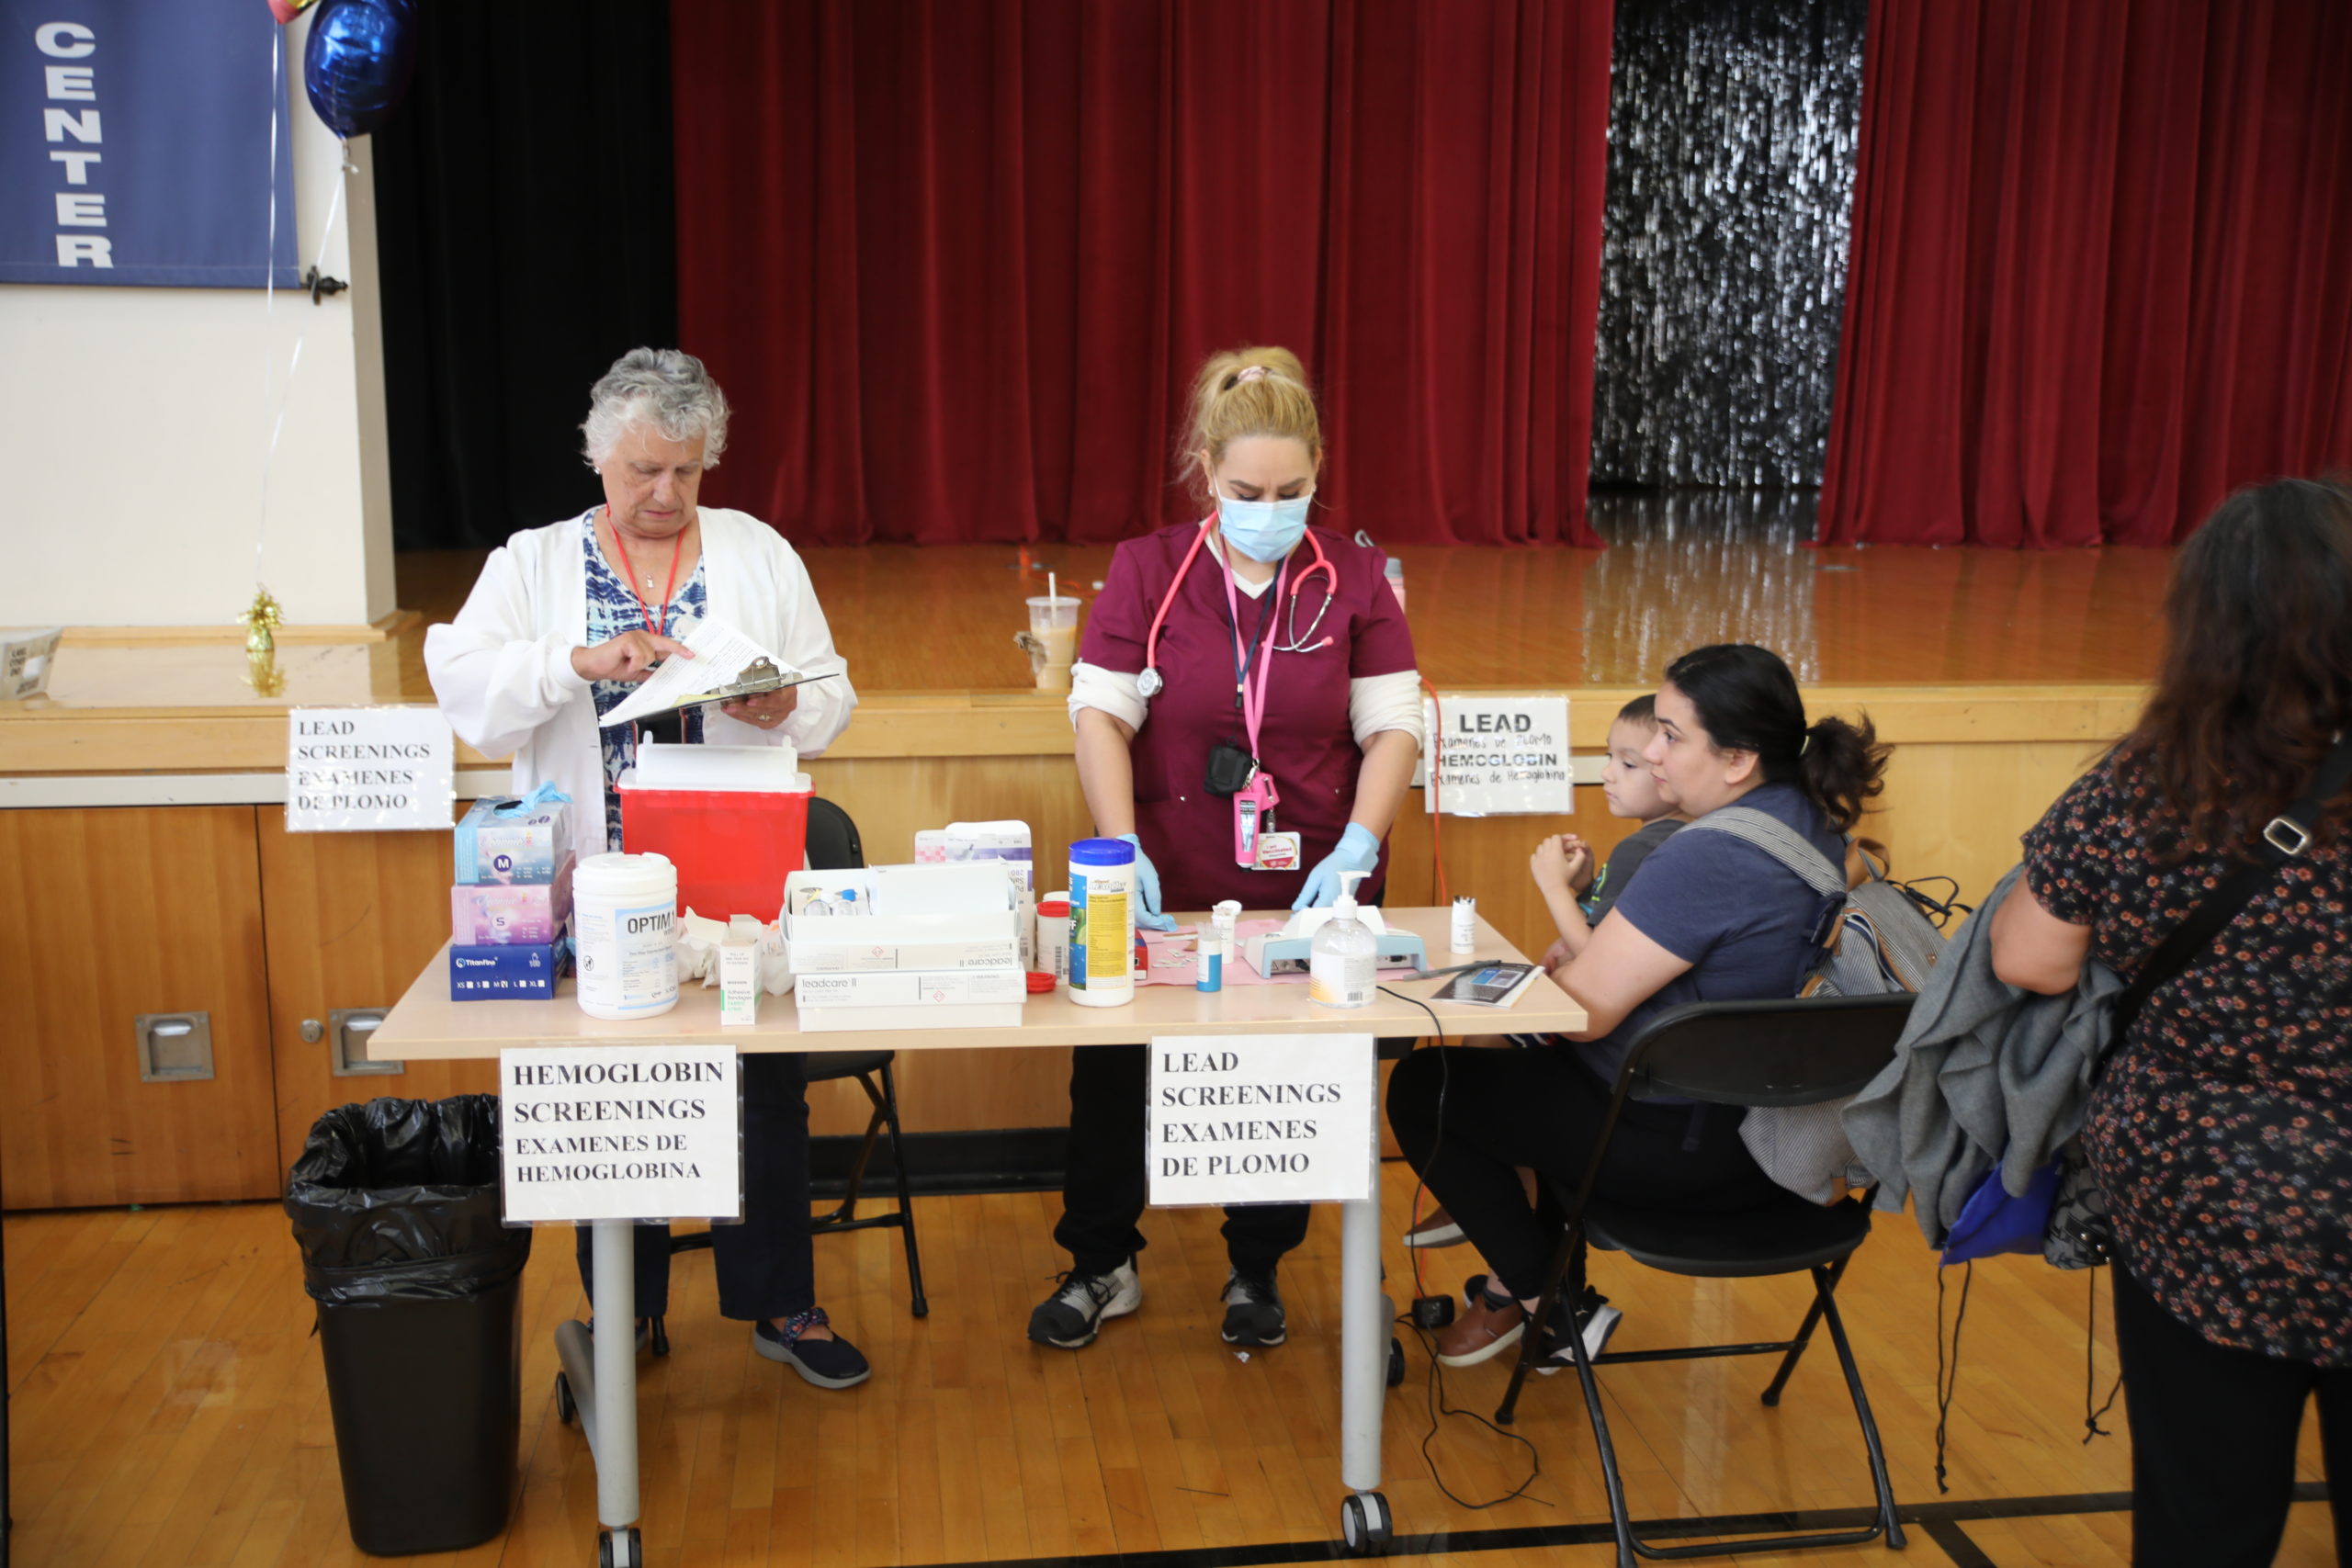 Town President Larry Dominick and the Town of Cicero Board of Trustees and the Cicero Health Department Director Sue Grazzini and her staff hosted a “Back to School” & Health Fair on Wednesday July 20 for students, families and Seniors at the Cicero Community Center., 2250 S. 49th Ave.